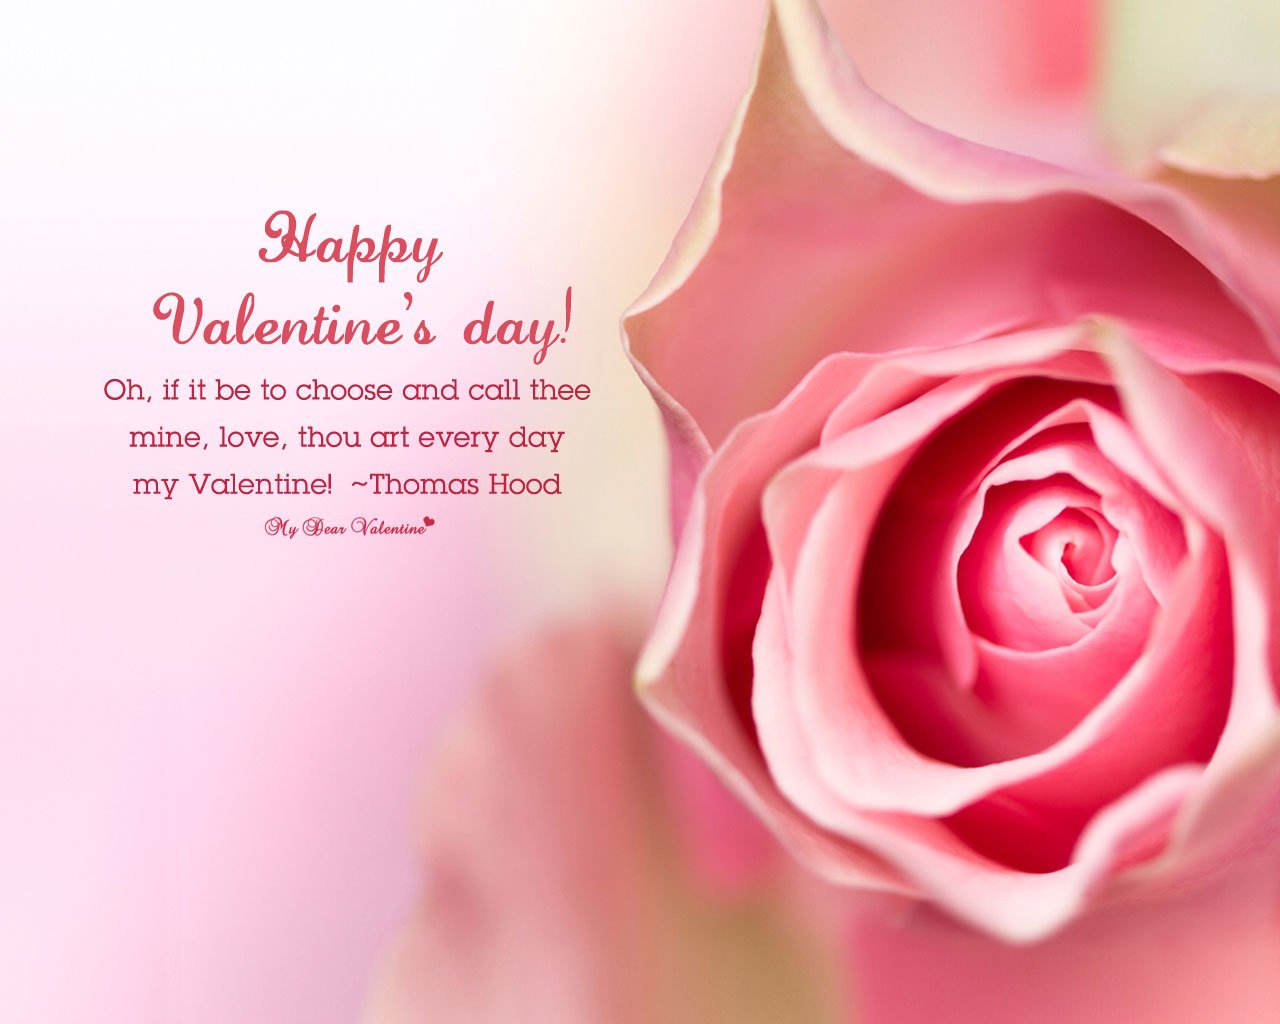 35 Happy Valentine’s Day HD Wallpapers, Backgrounds & Pictures – Designbolts